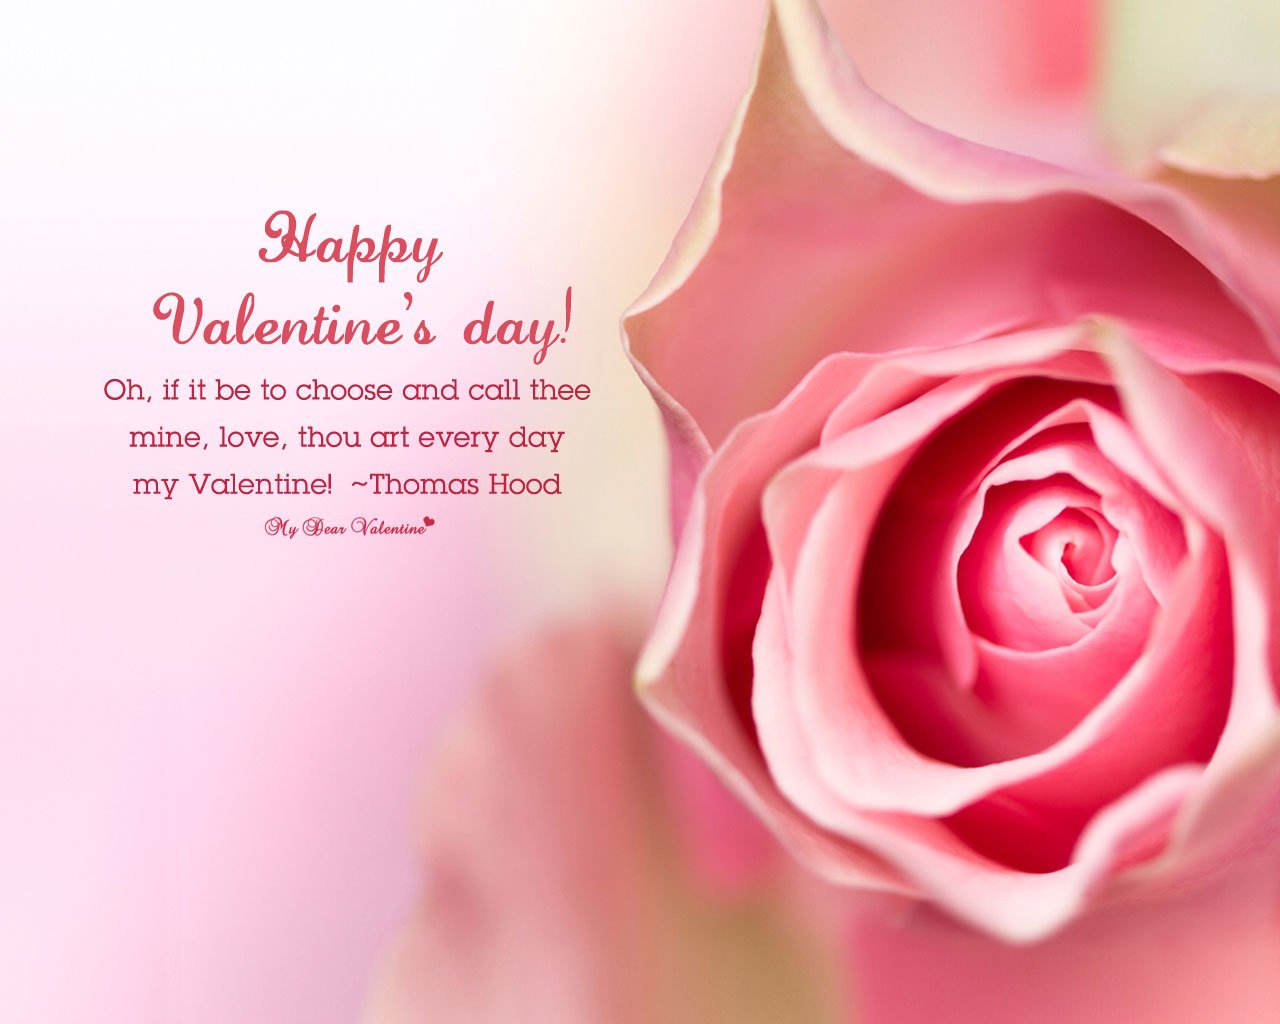 35 Happy Valentine’s Day HD Wallpapers, Backgrounds & Pictures – Designbolts